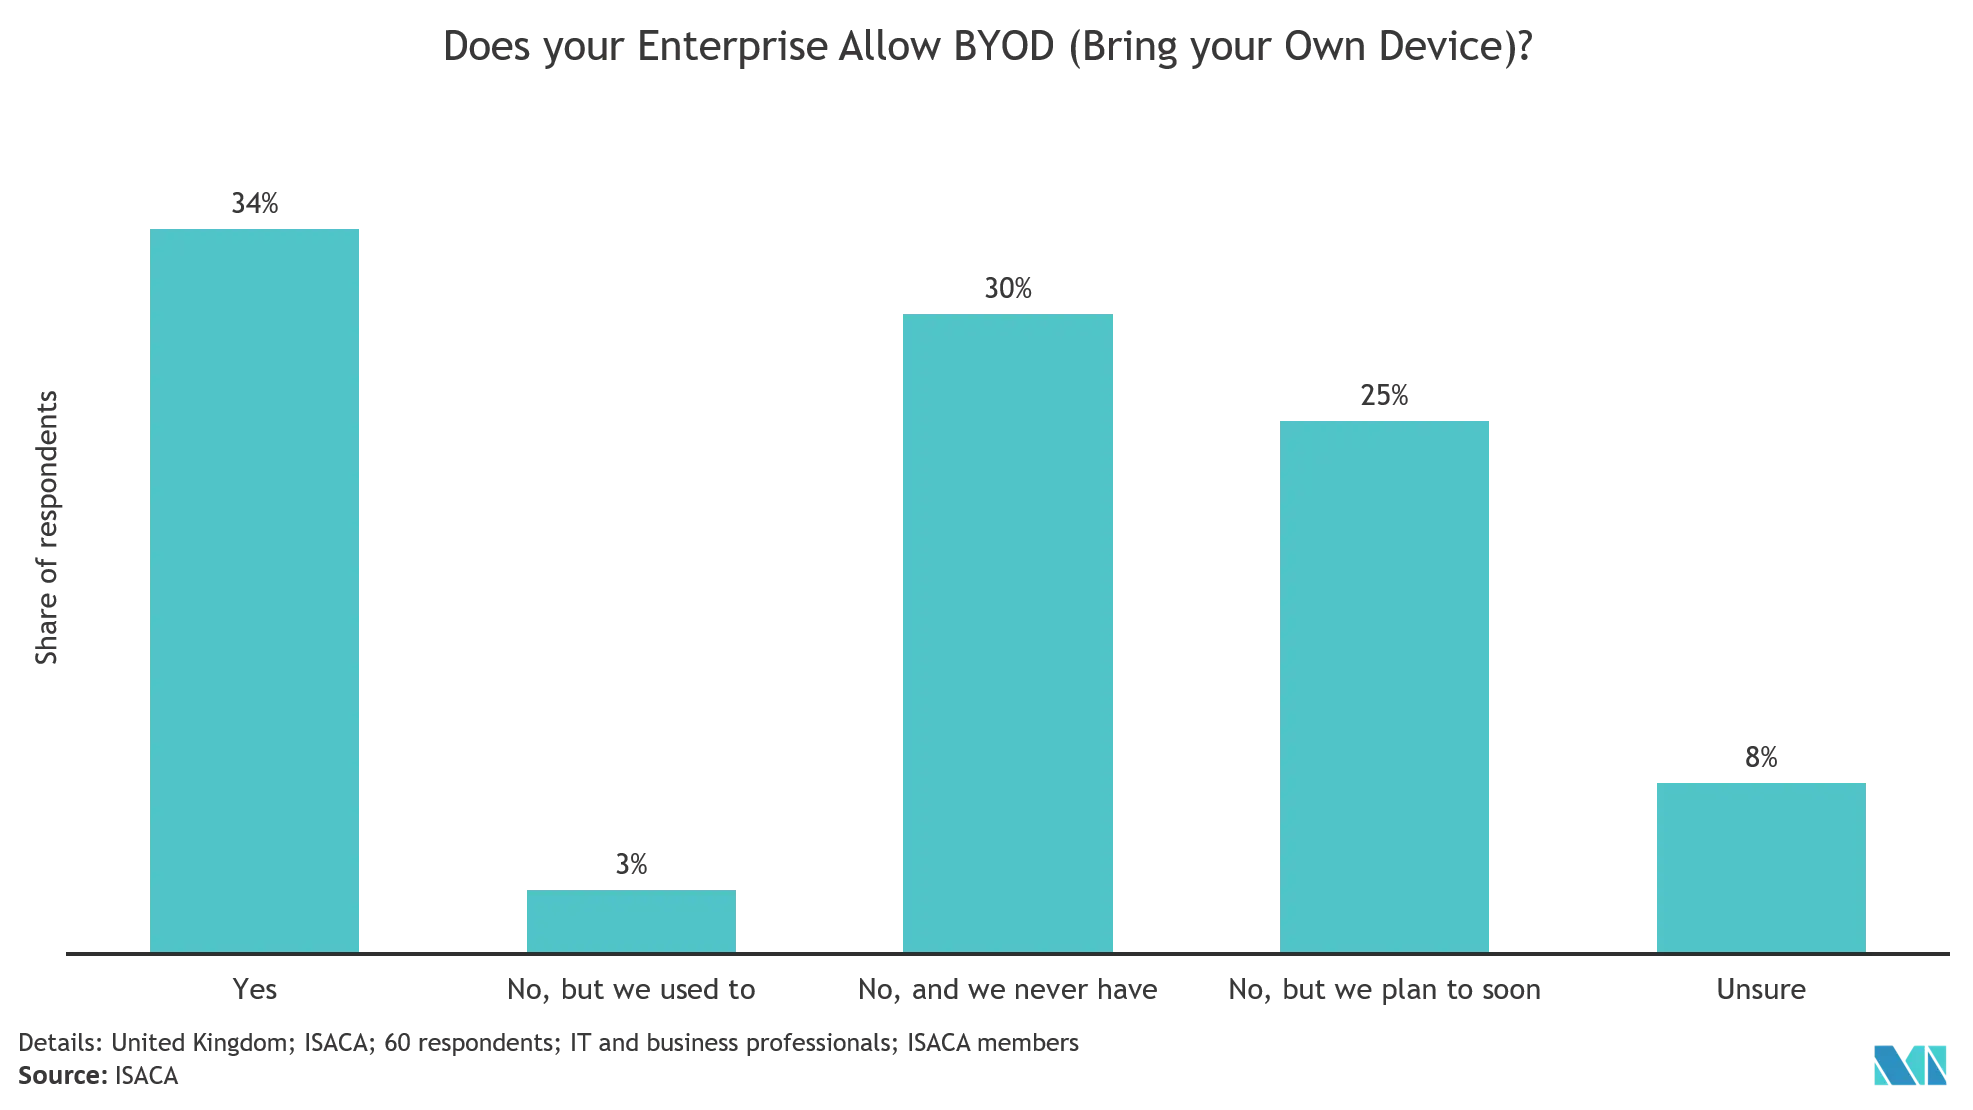 Virtual Private Server Market: Does your Enterprise Allow BYOD (Bring your Own Device)?